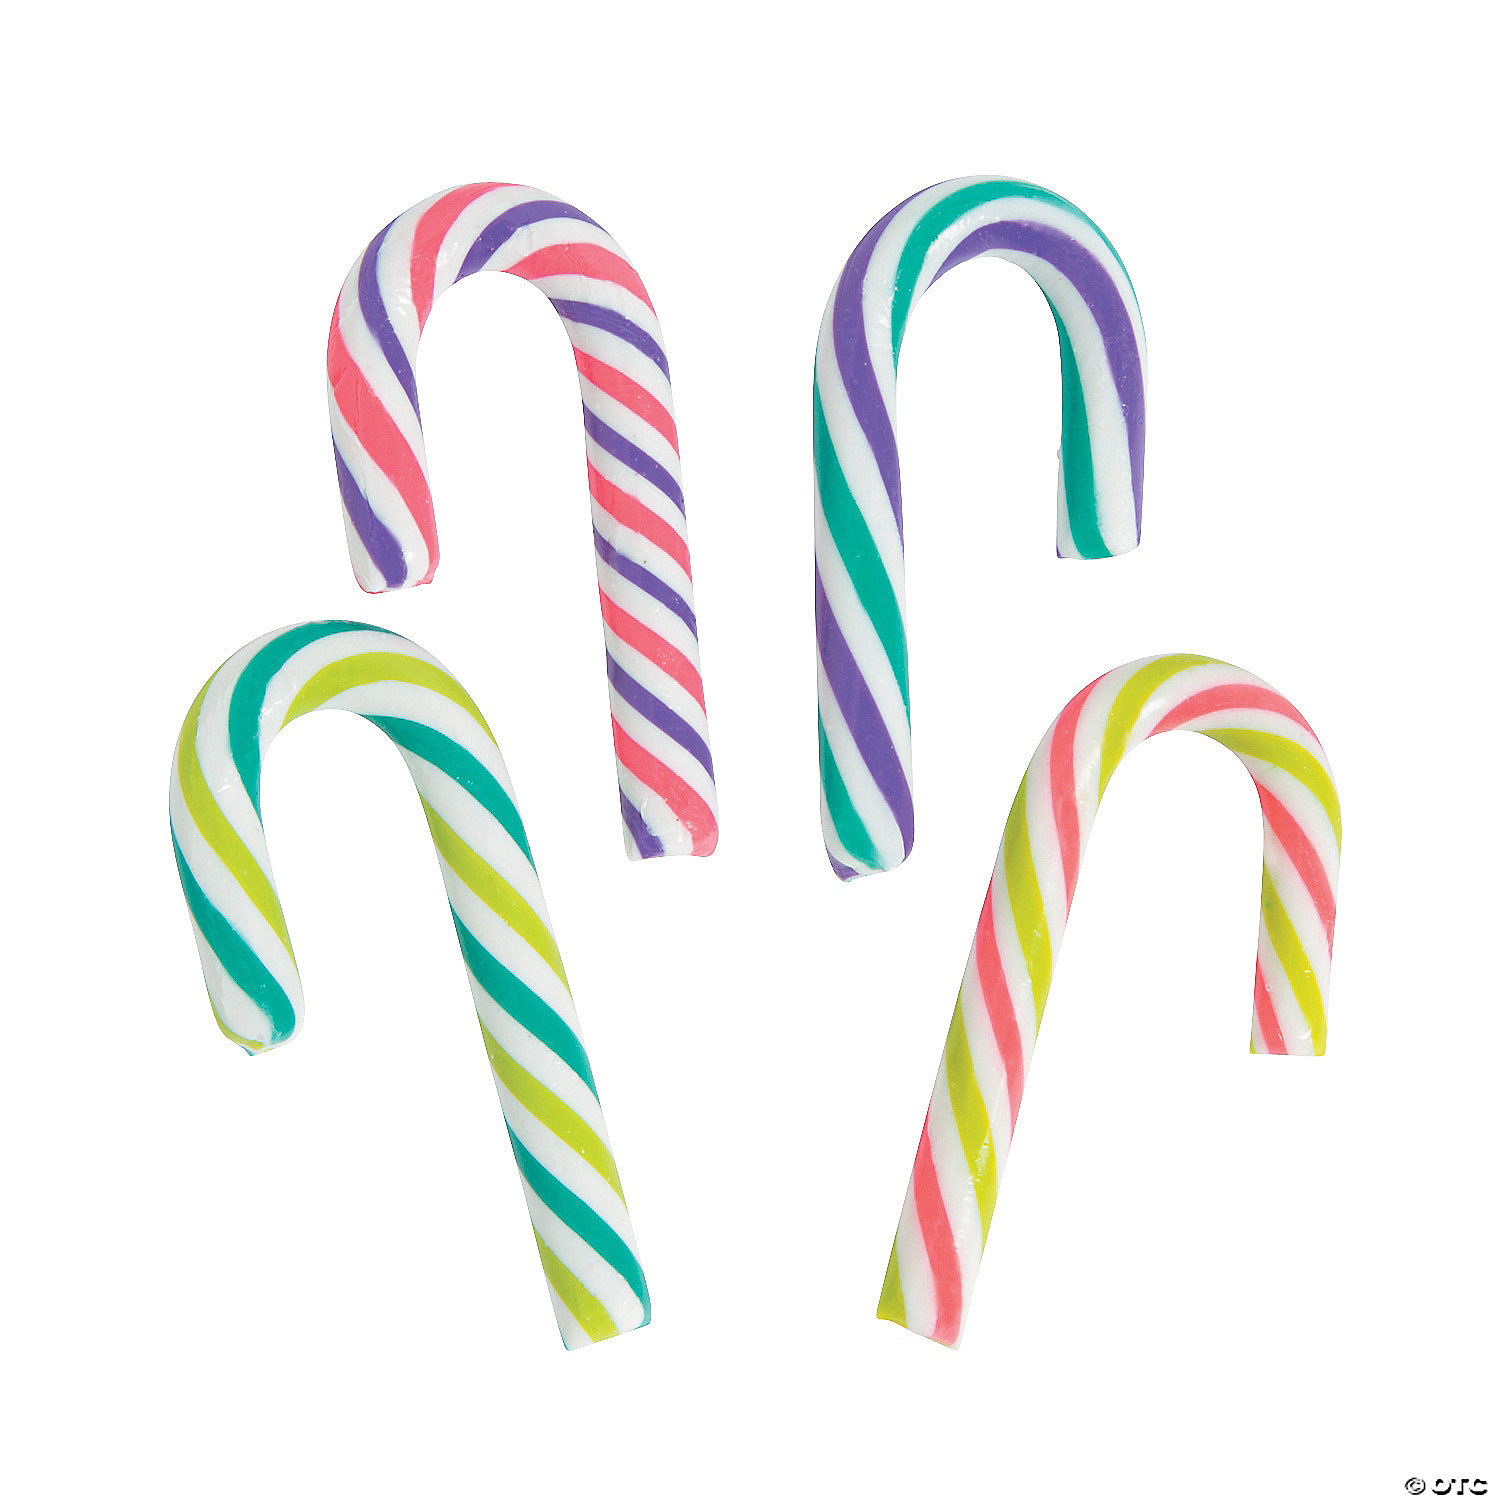 80 CANDY CANES CHRISTMAS PERSONALIZED RETURN ADDRESS LABELS 1/2 in X 1 3/4 in 